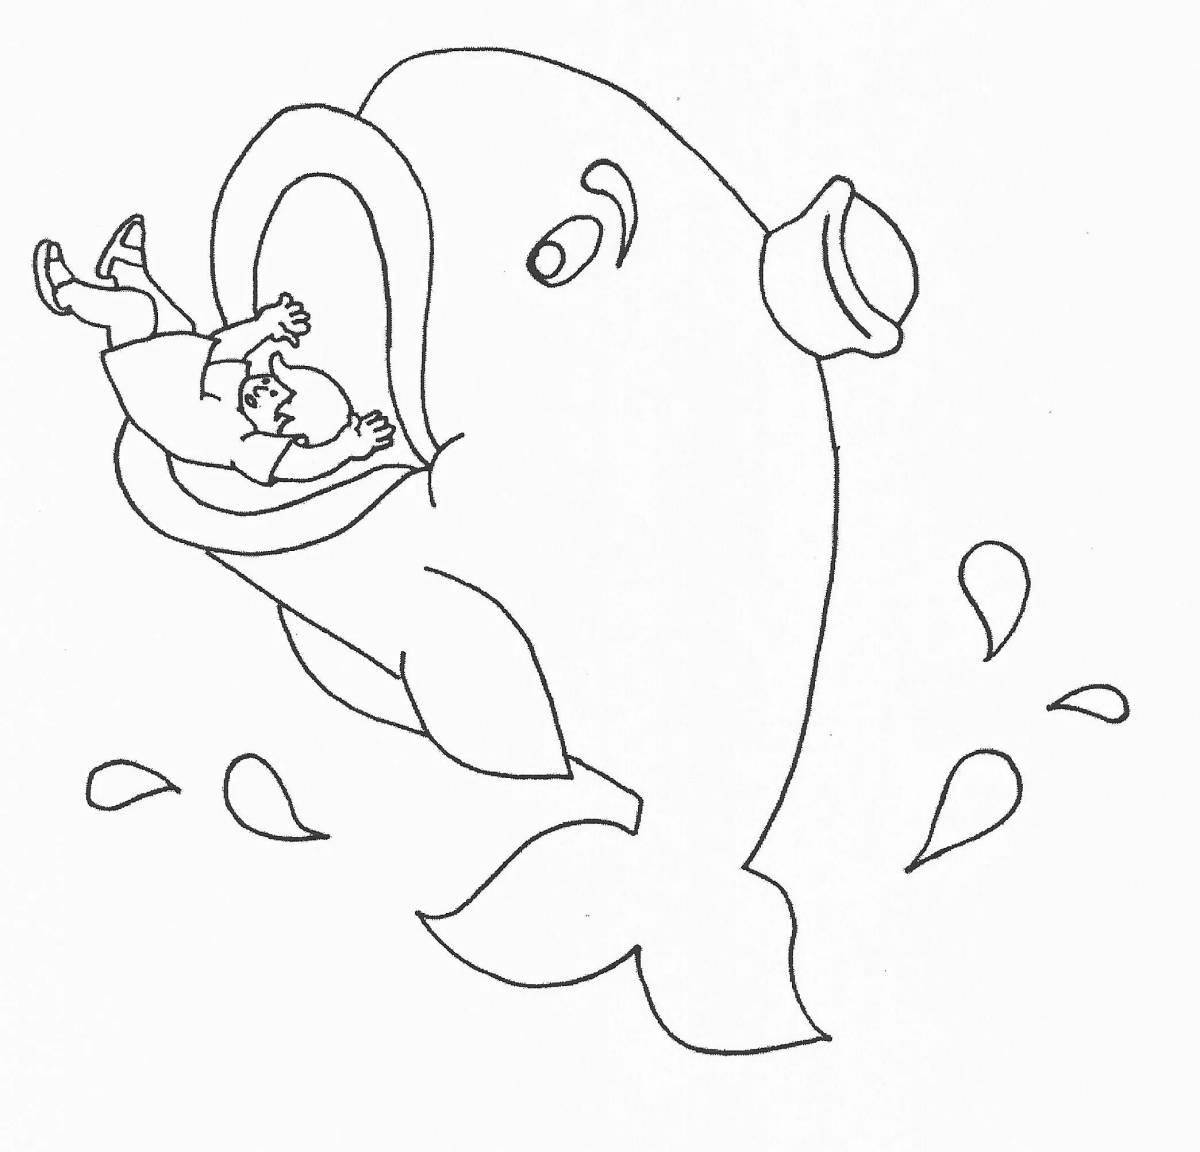 Amazing whale and iona coloring book